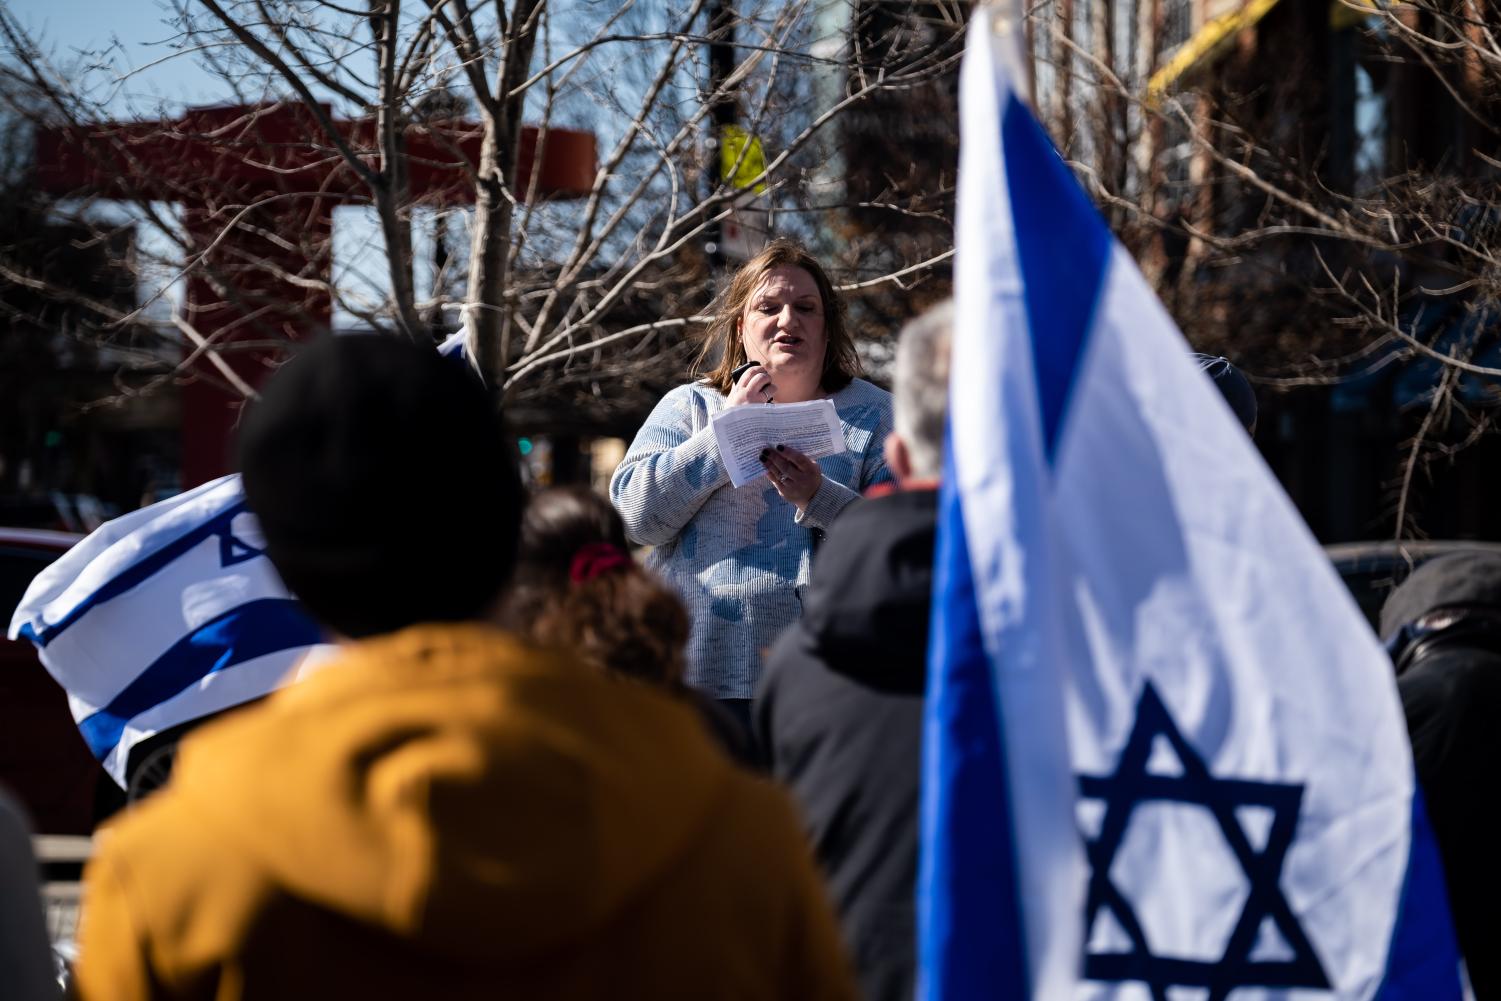 A+woman+reads+from+a+paper+in+front+of+a+crowd+and+an+Israeli+flag.